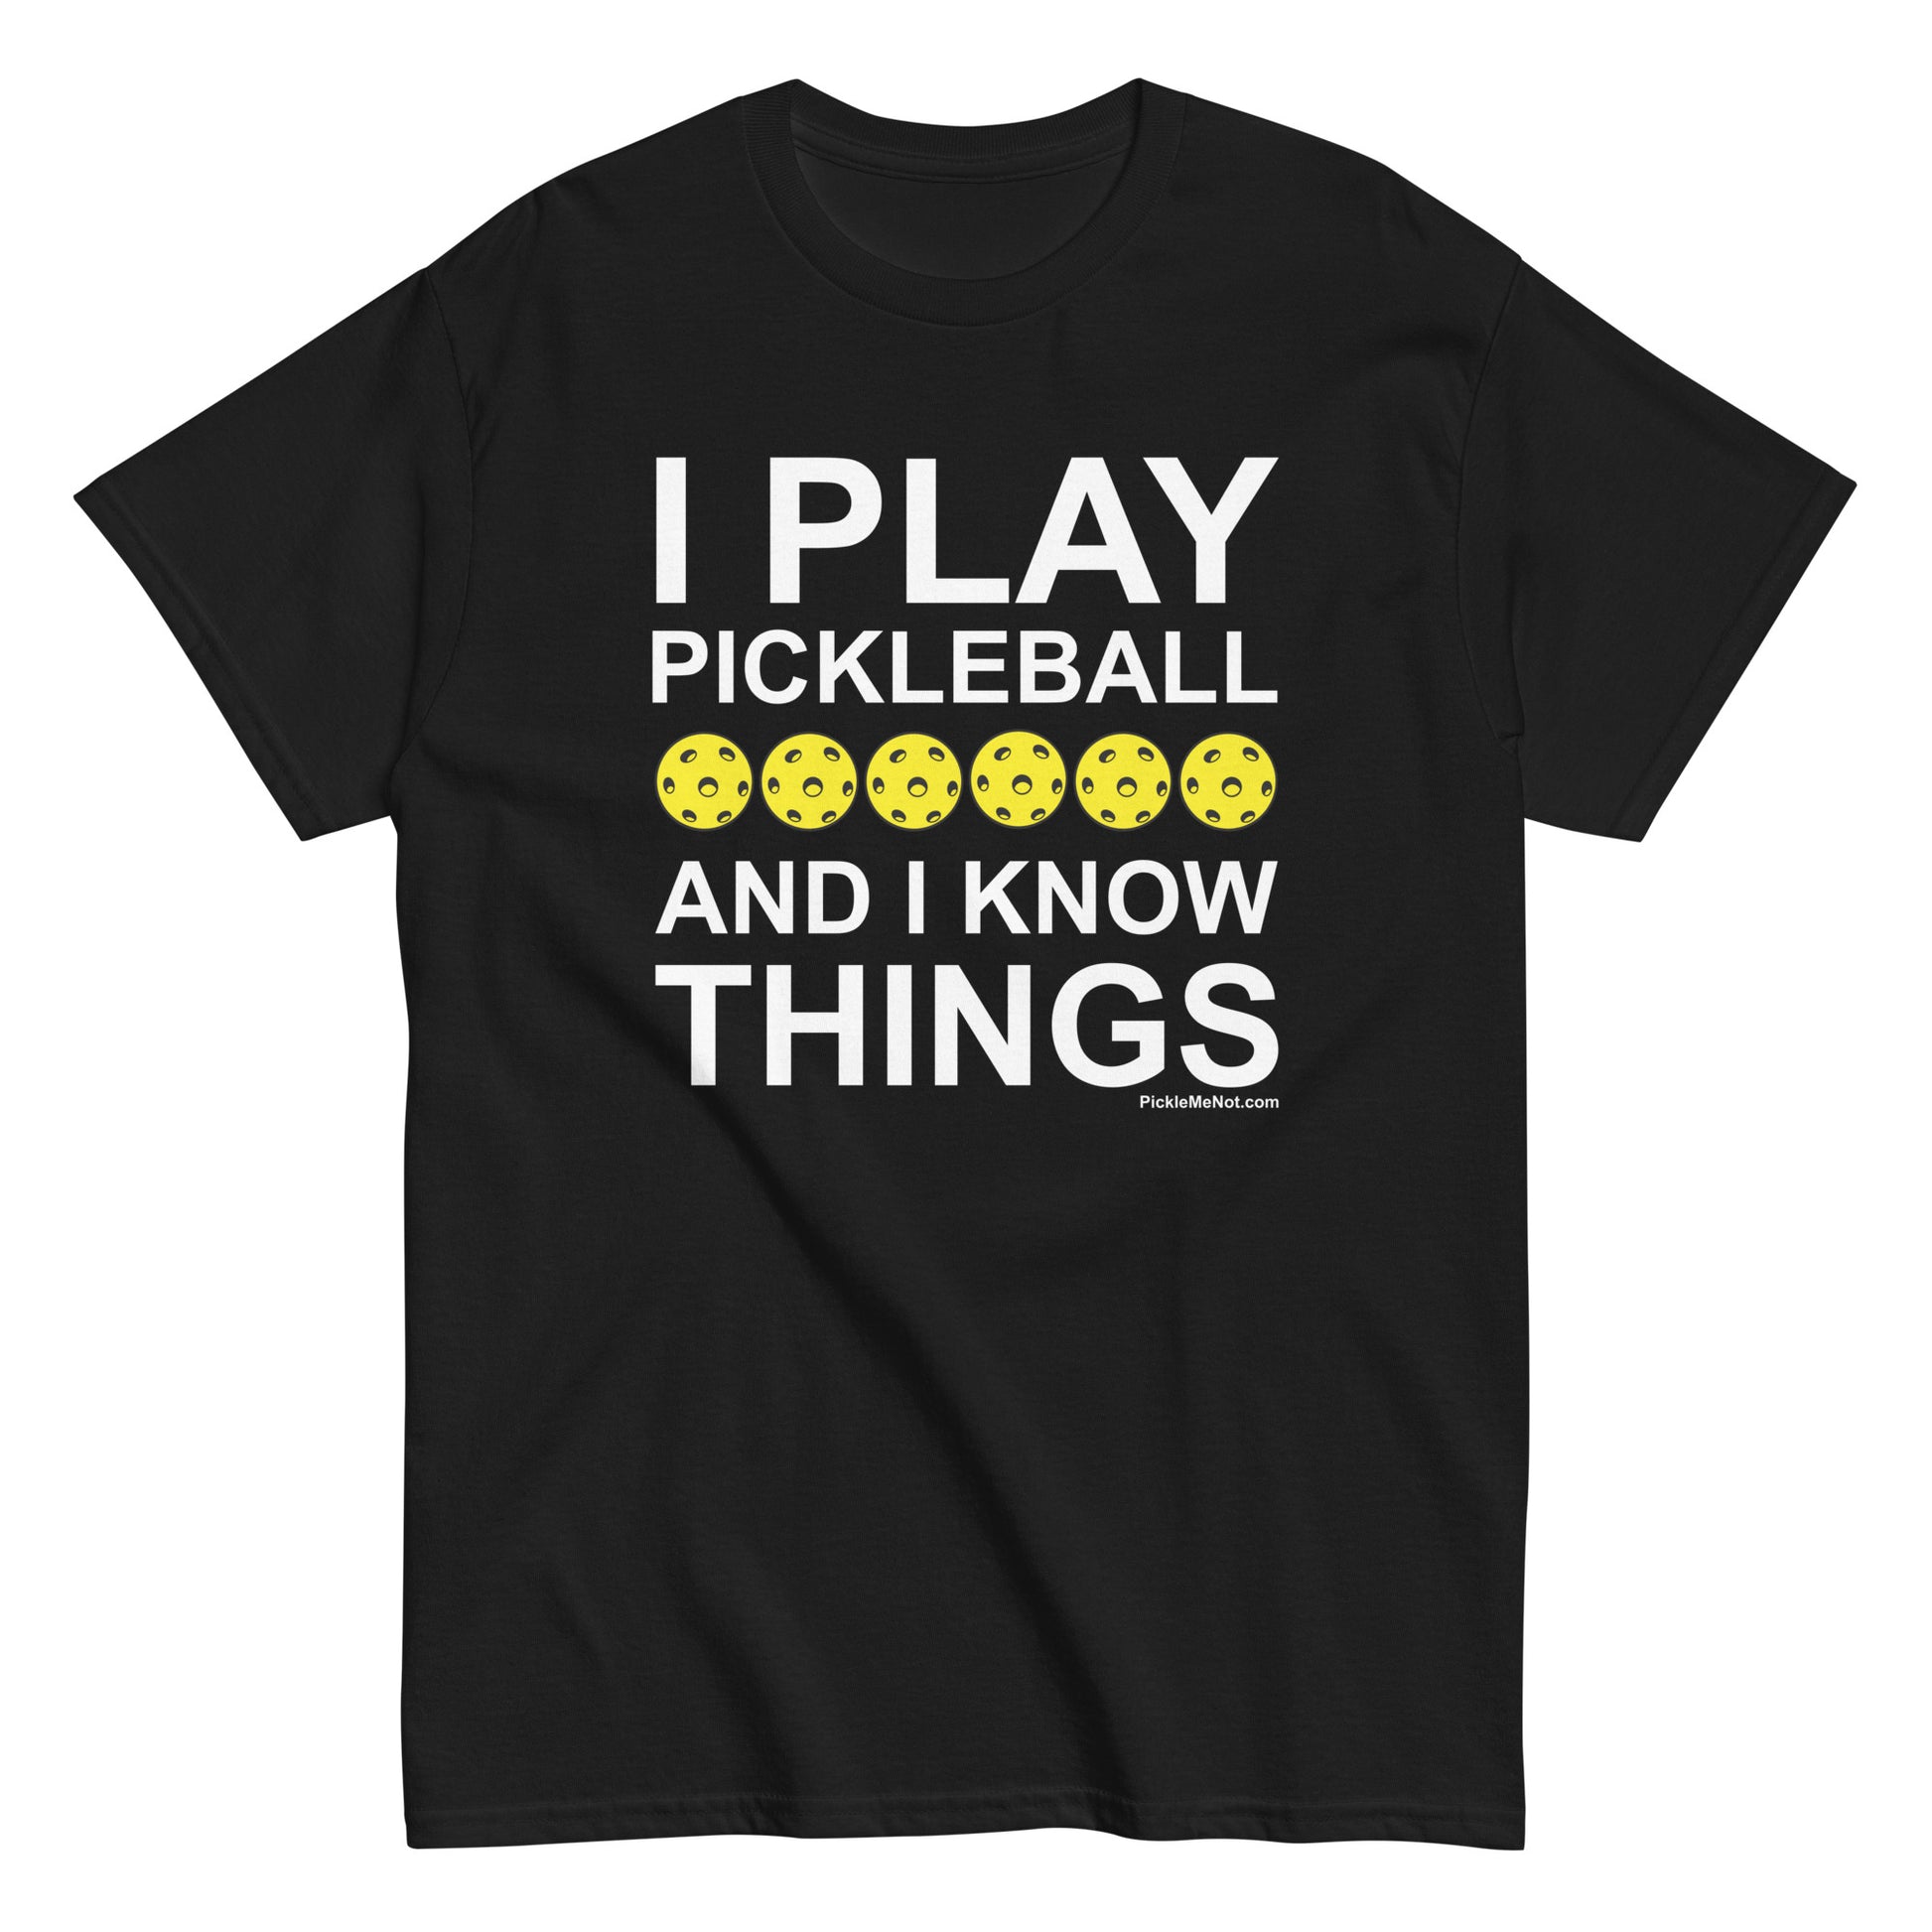 Fun Pickleball, "I Play Pickleball And I Know Things" Men's Classic Black Tee